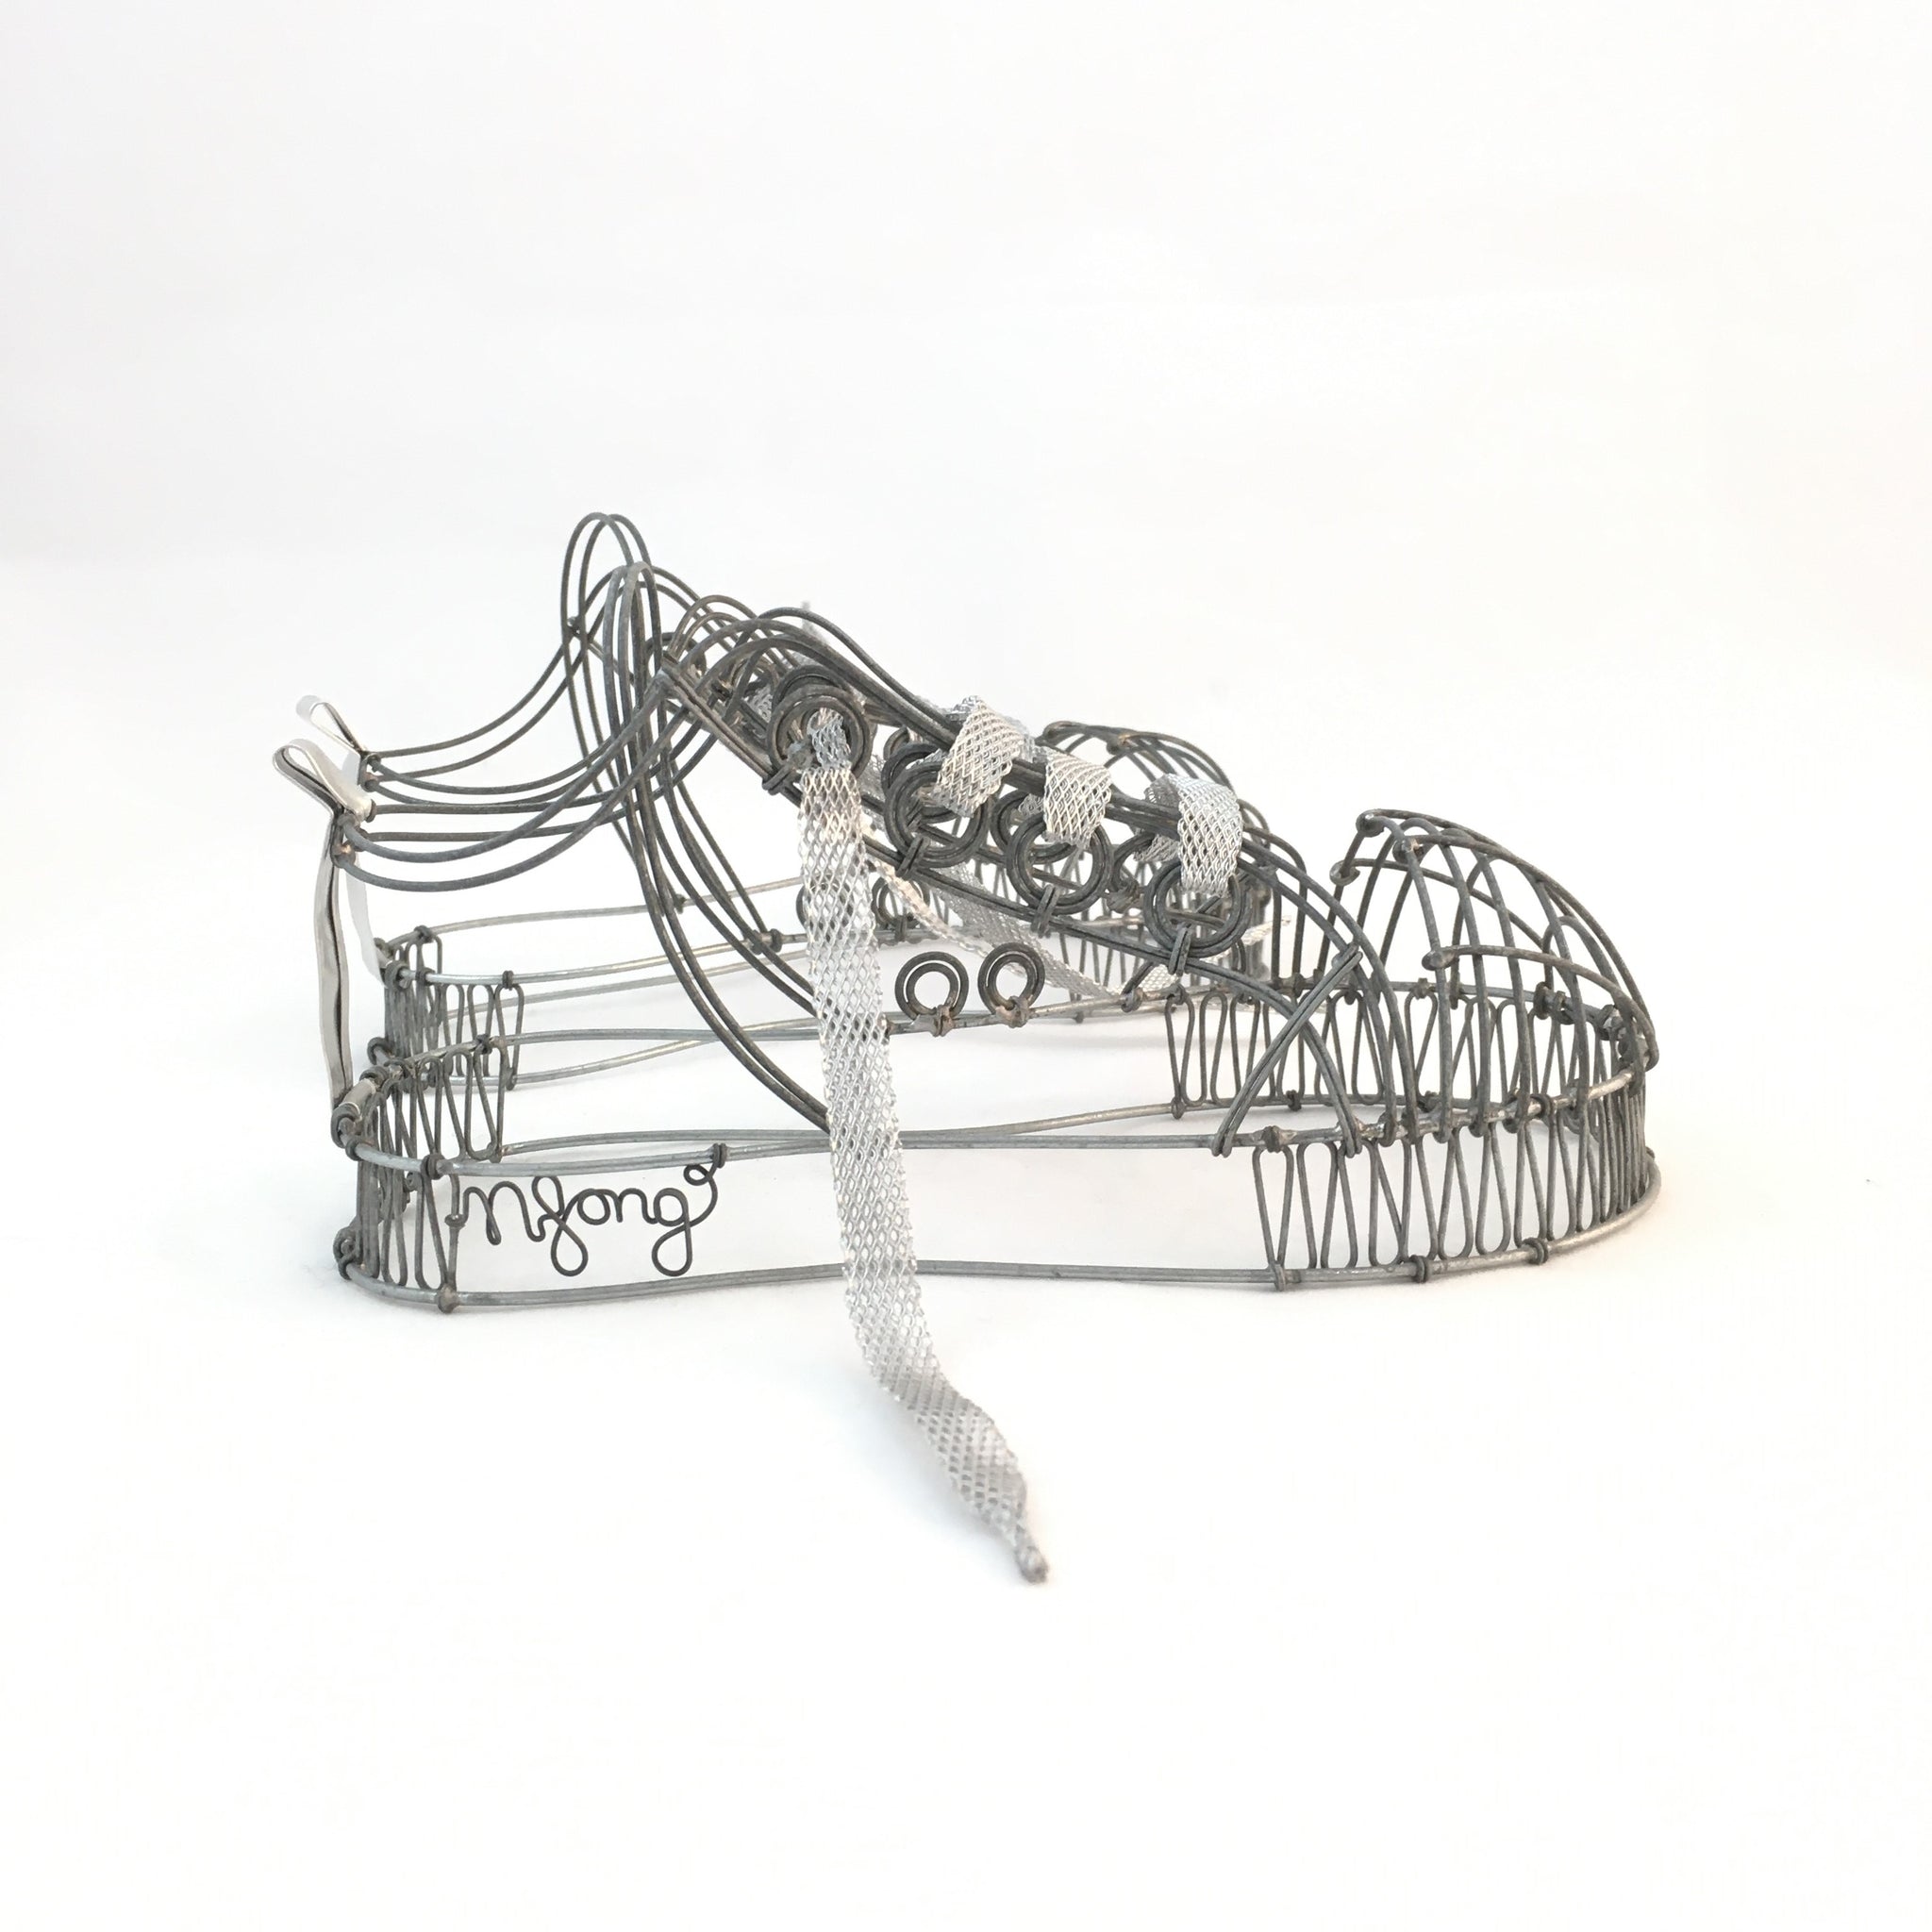 wire shoes at Craft NSW